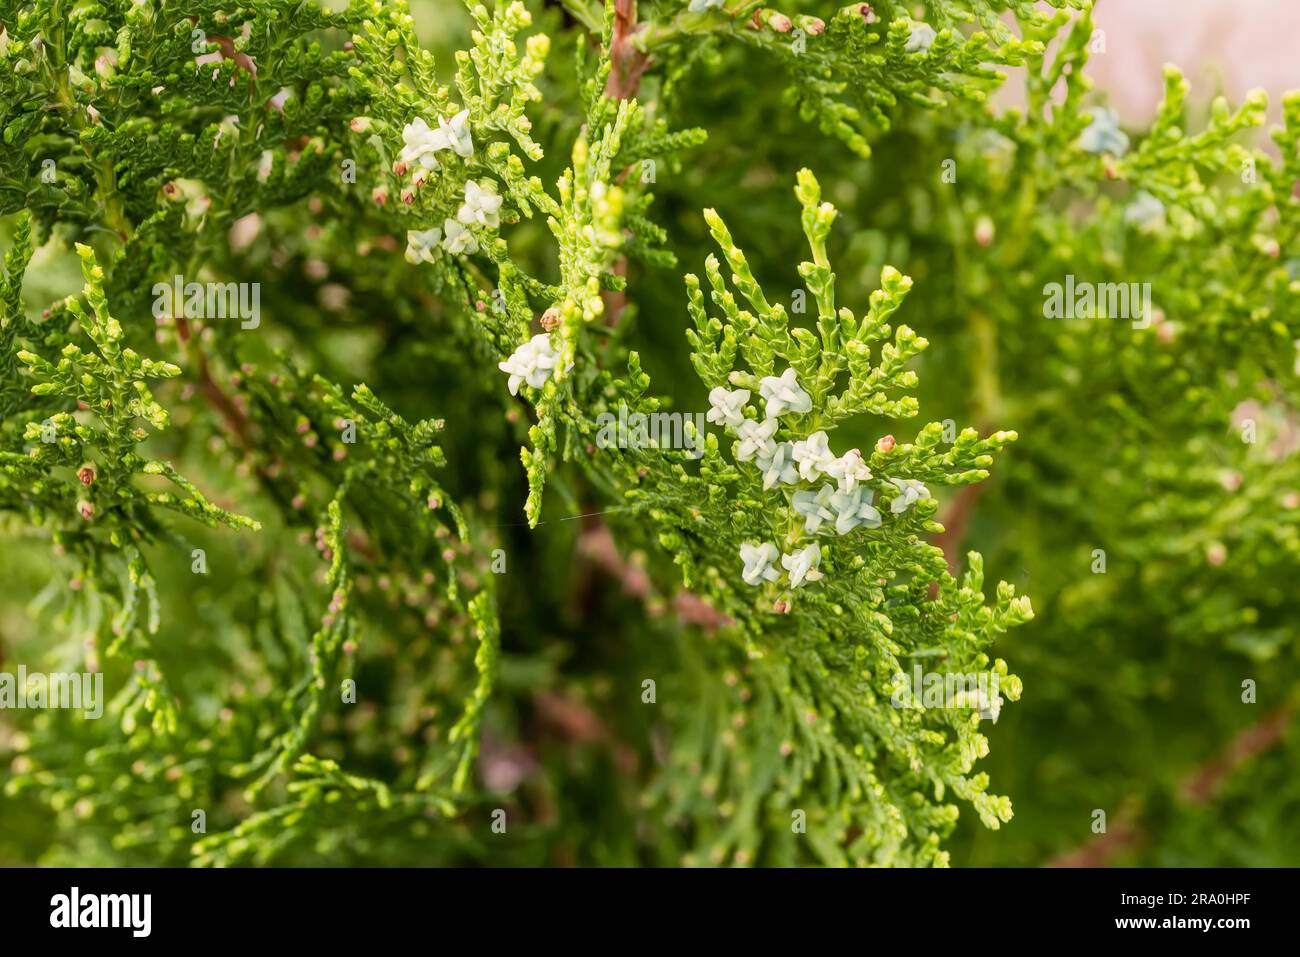 Detail of (thuja) branches with fruits and flowers Stock Photo